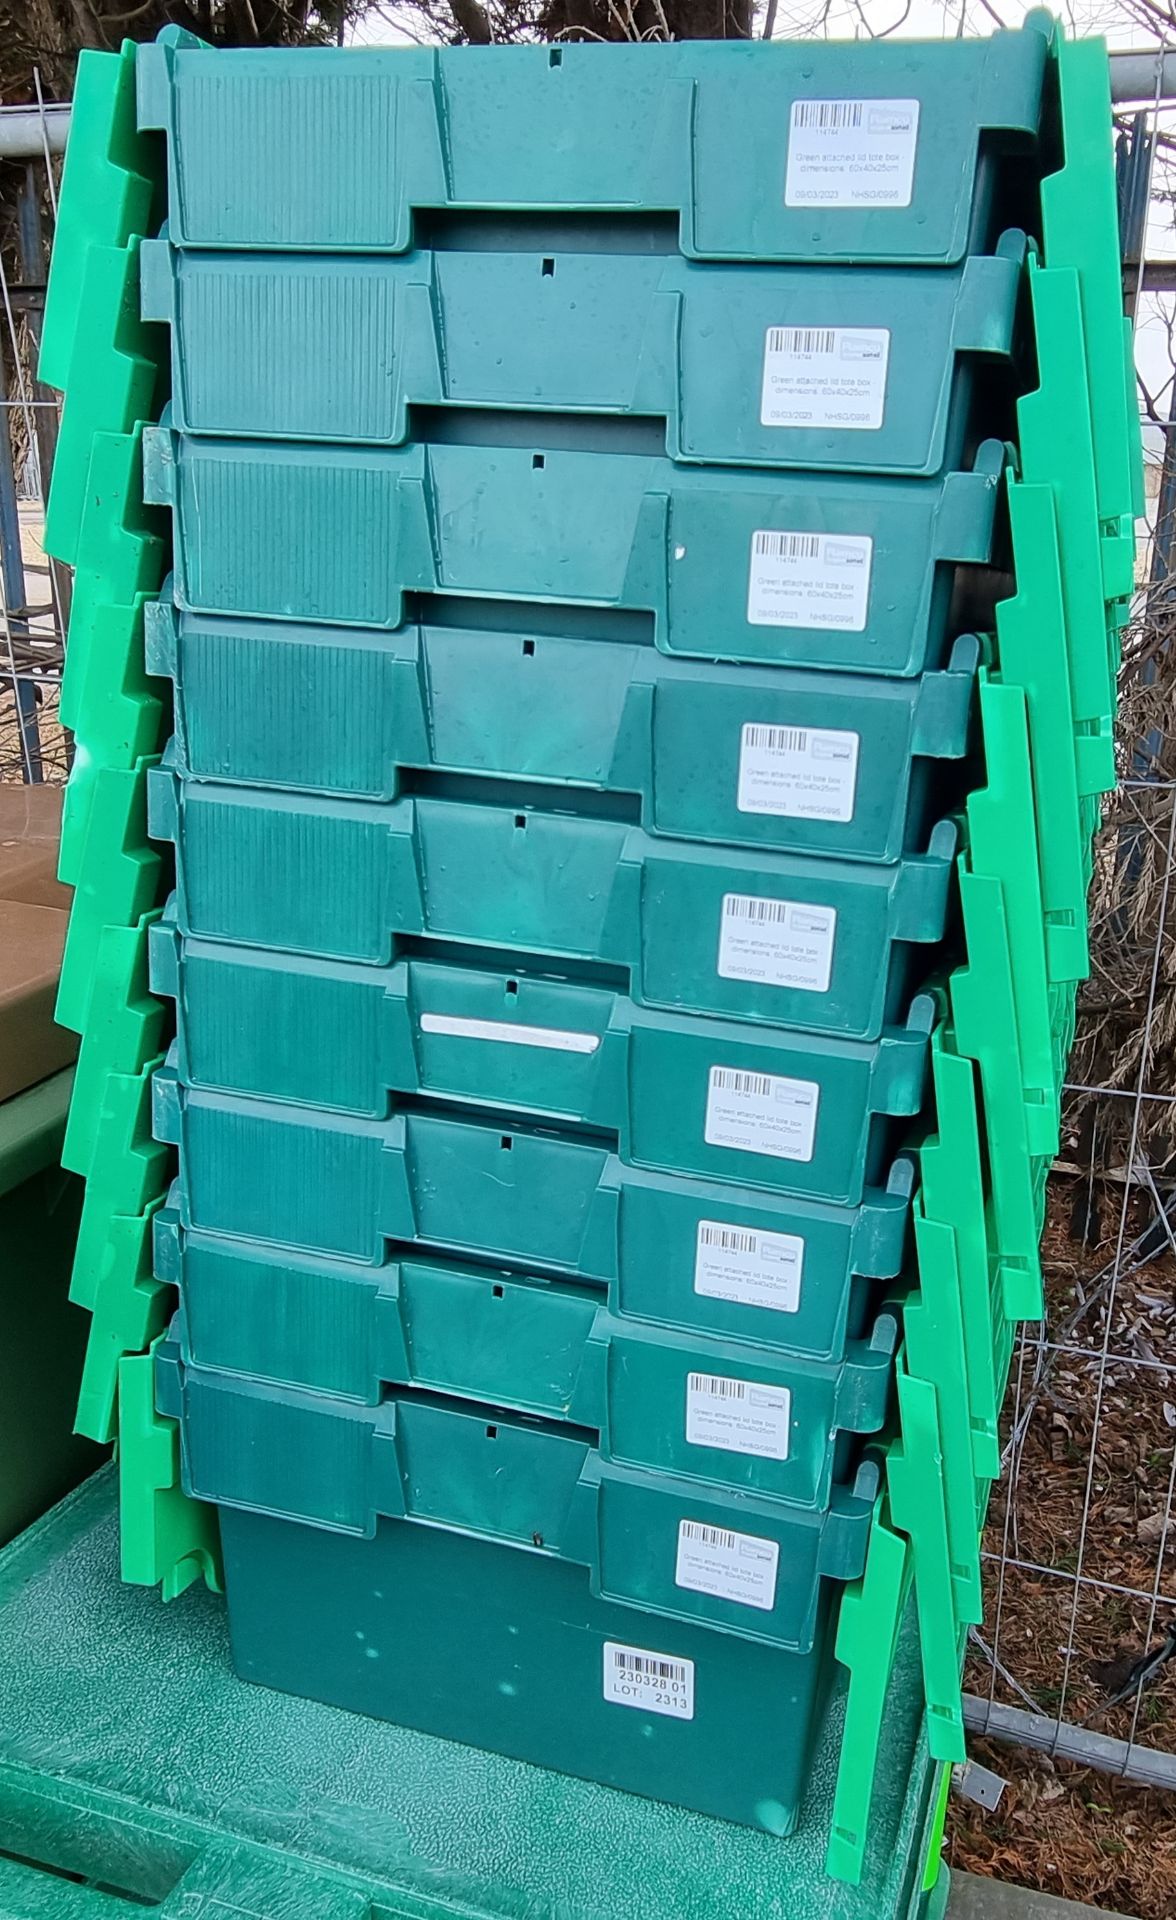 9x Green attached lid tote boxes - dimensions: 60 x 40 x 25cm